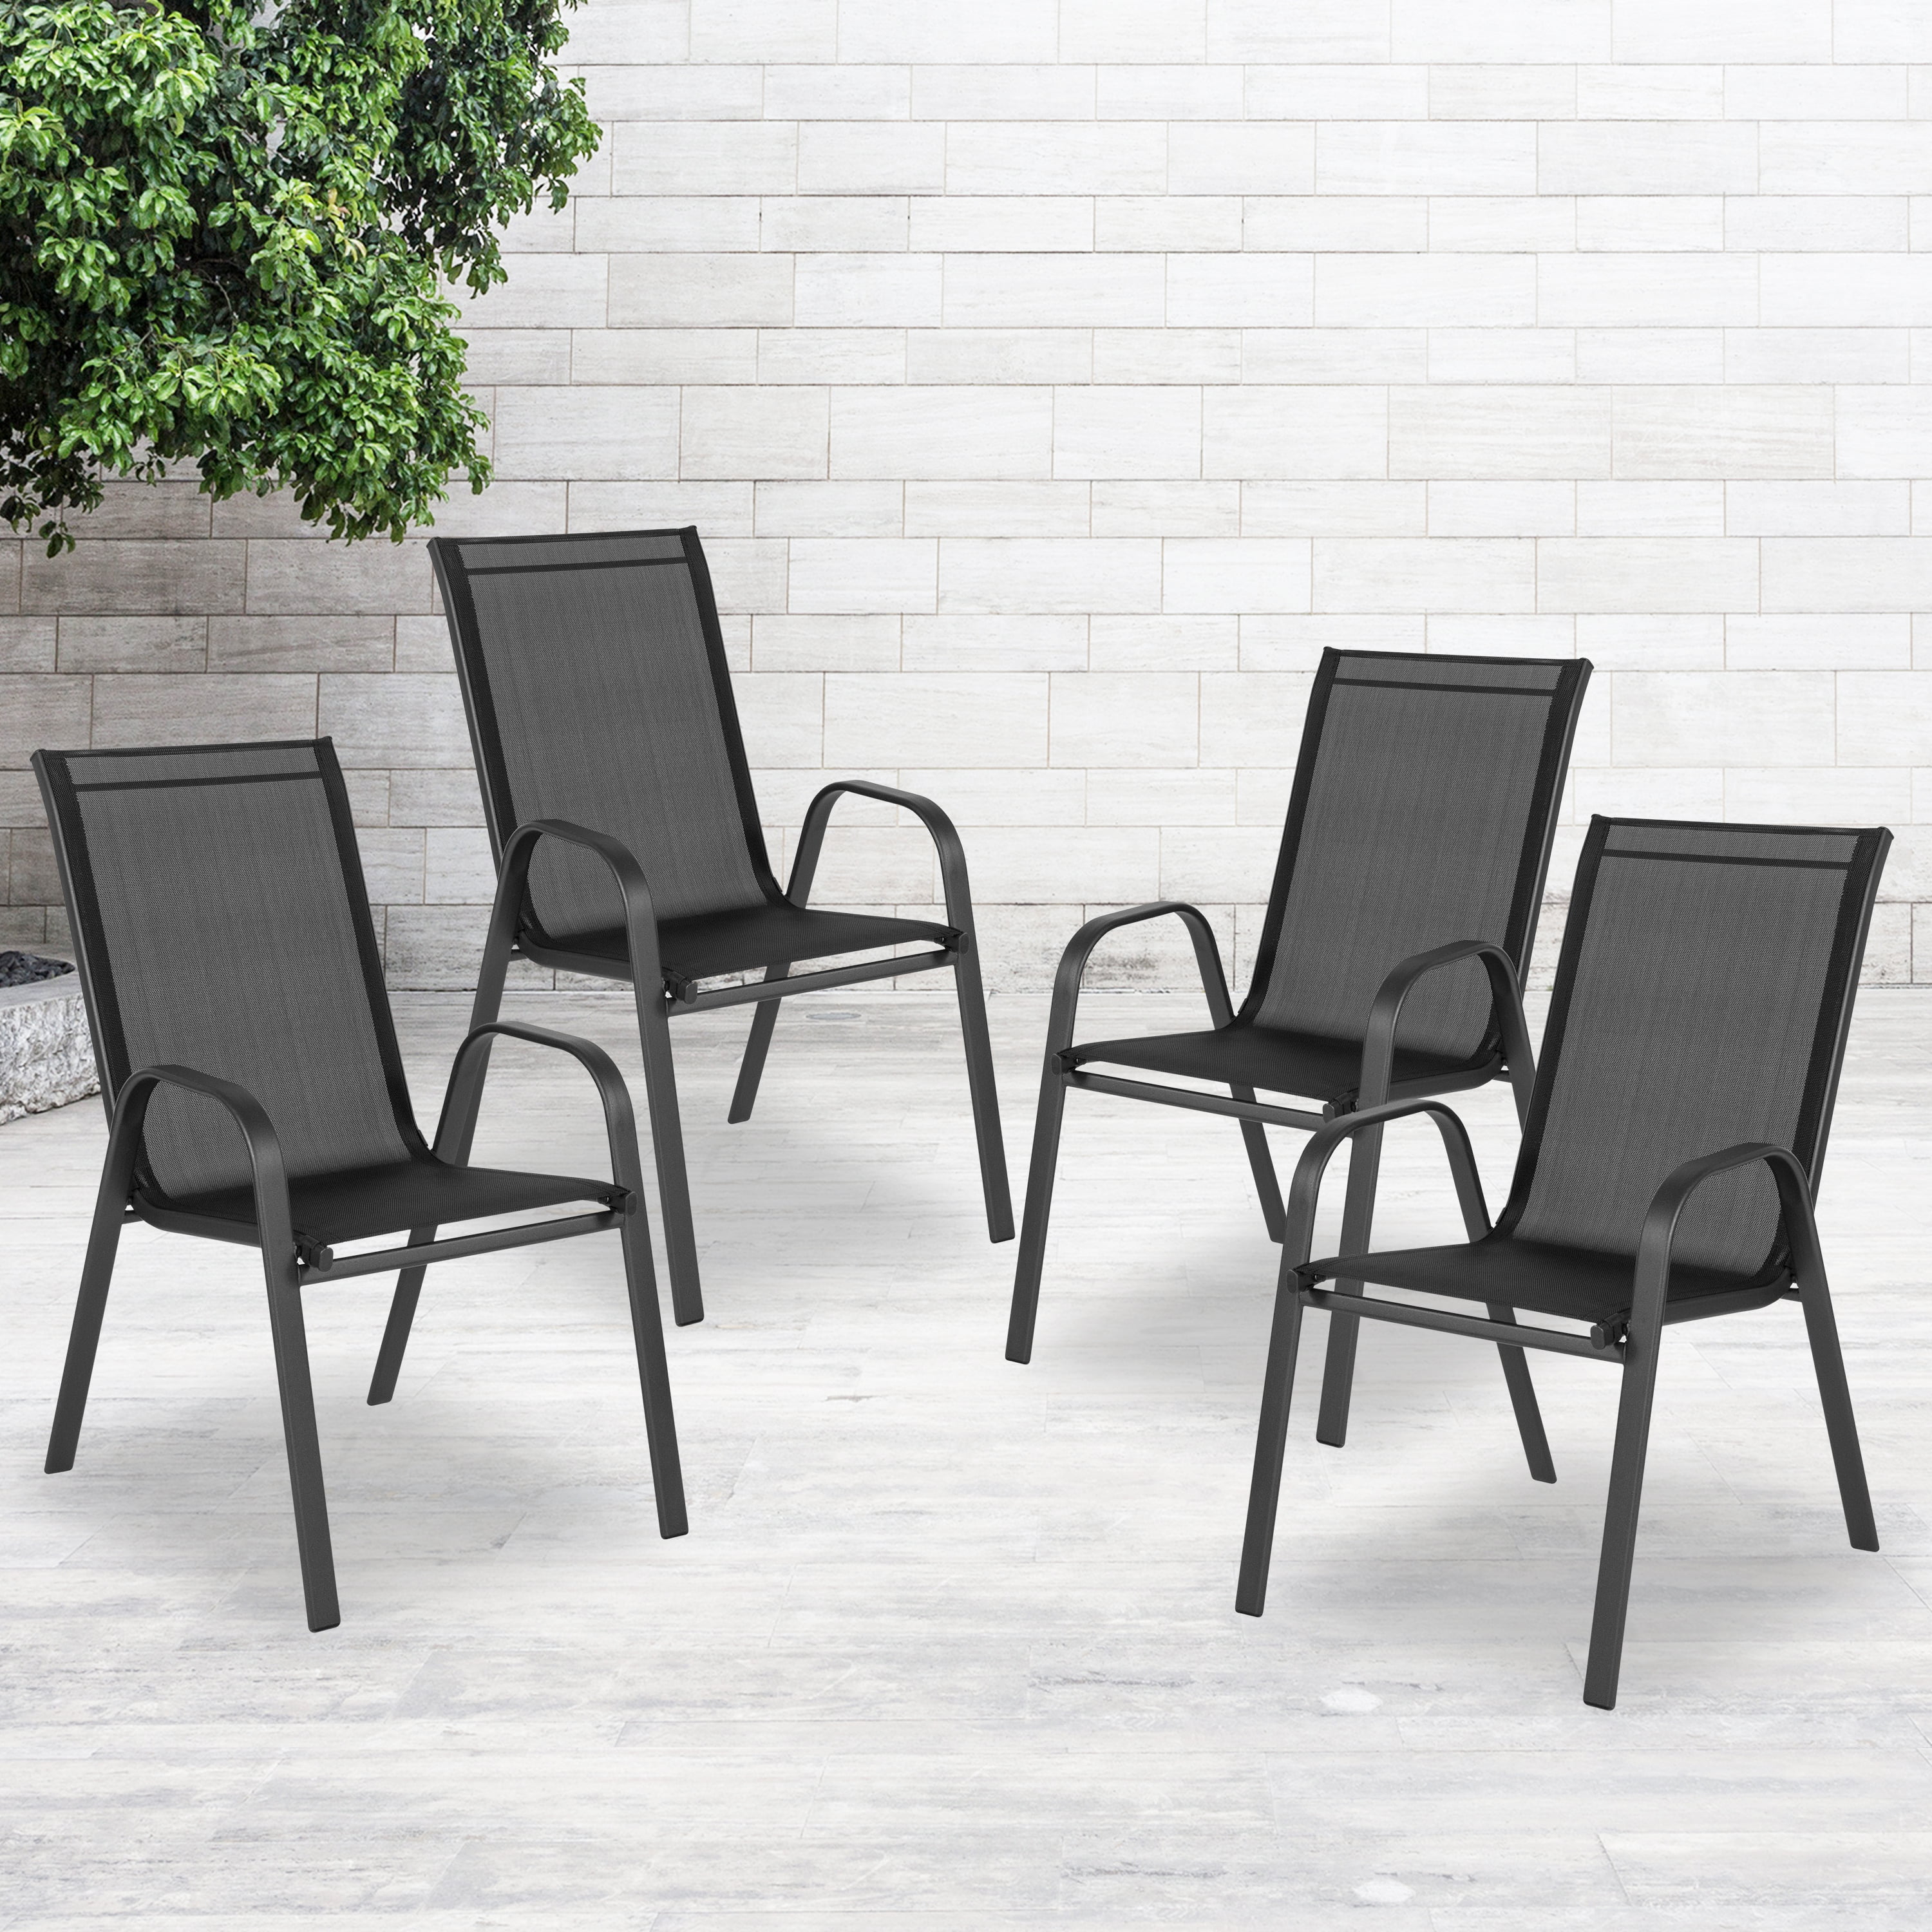 Flash Furniture 4 Pack Brazos Series Black Outdoor Stack Chair with